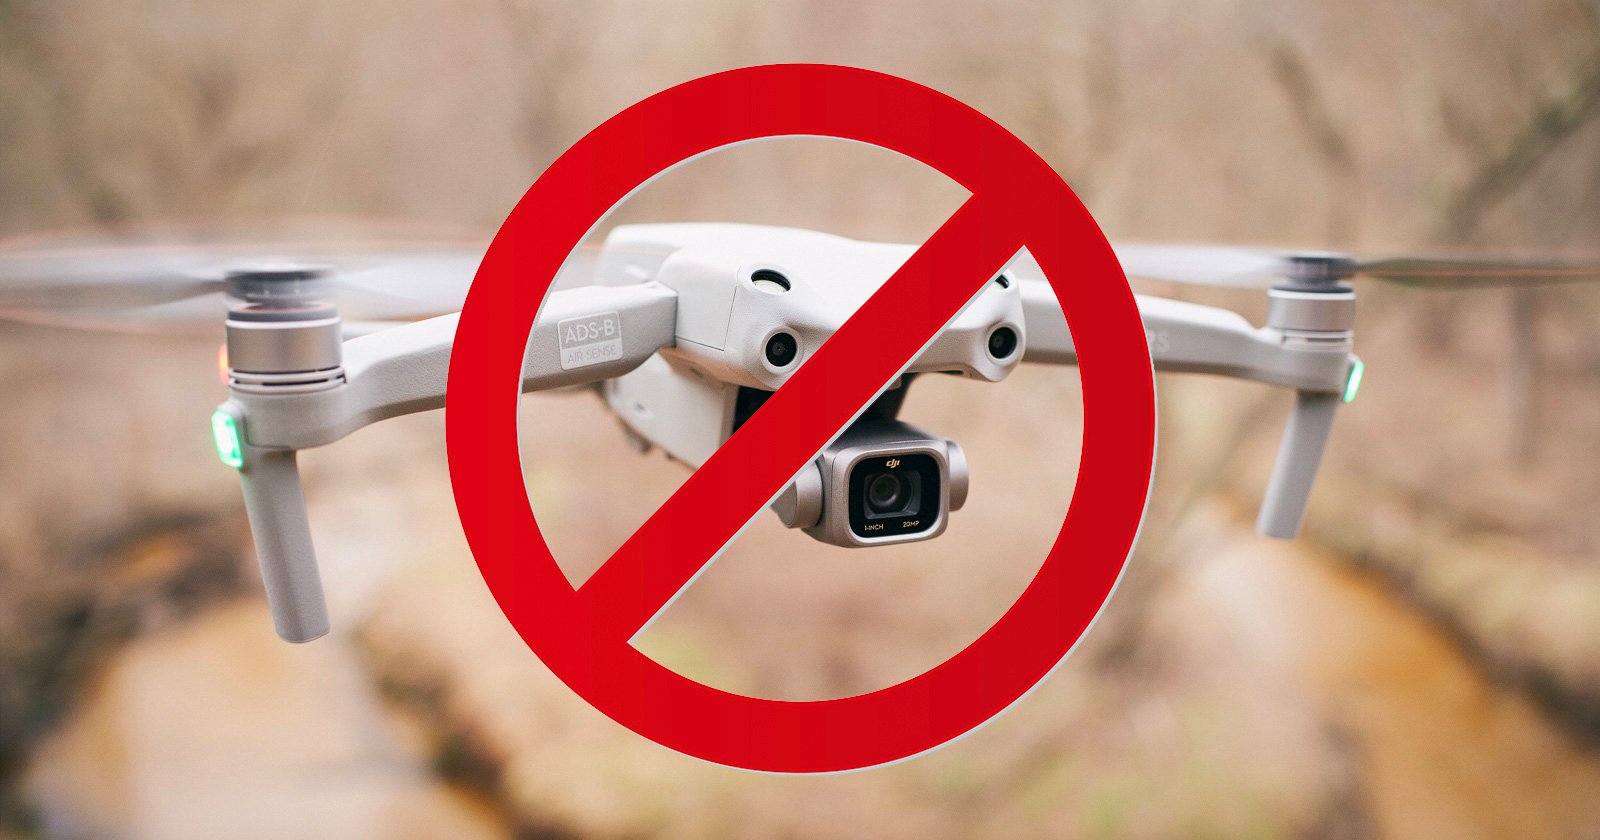 Top FCC Official Calls For Ban of DJI Drones Citing National Security Risk